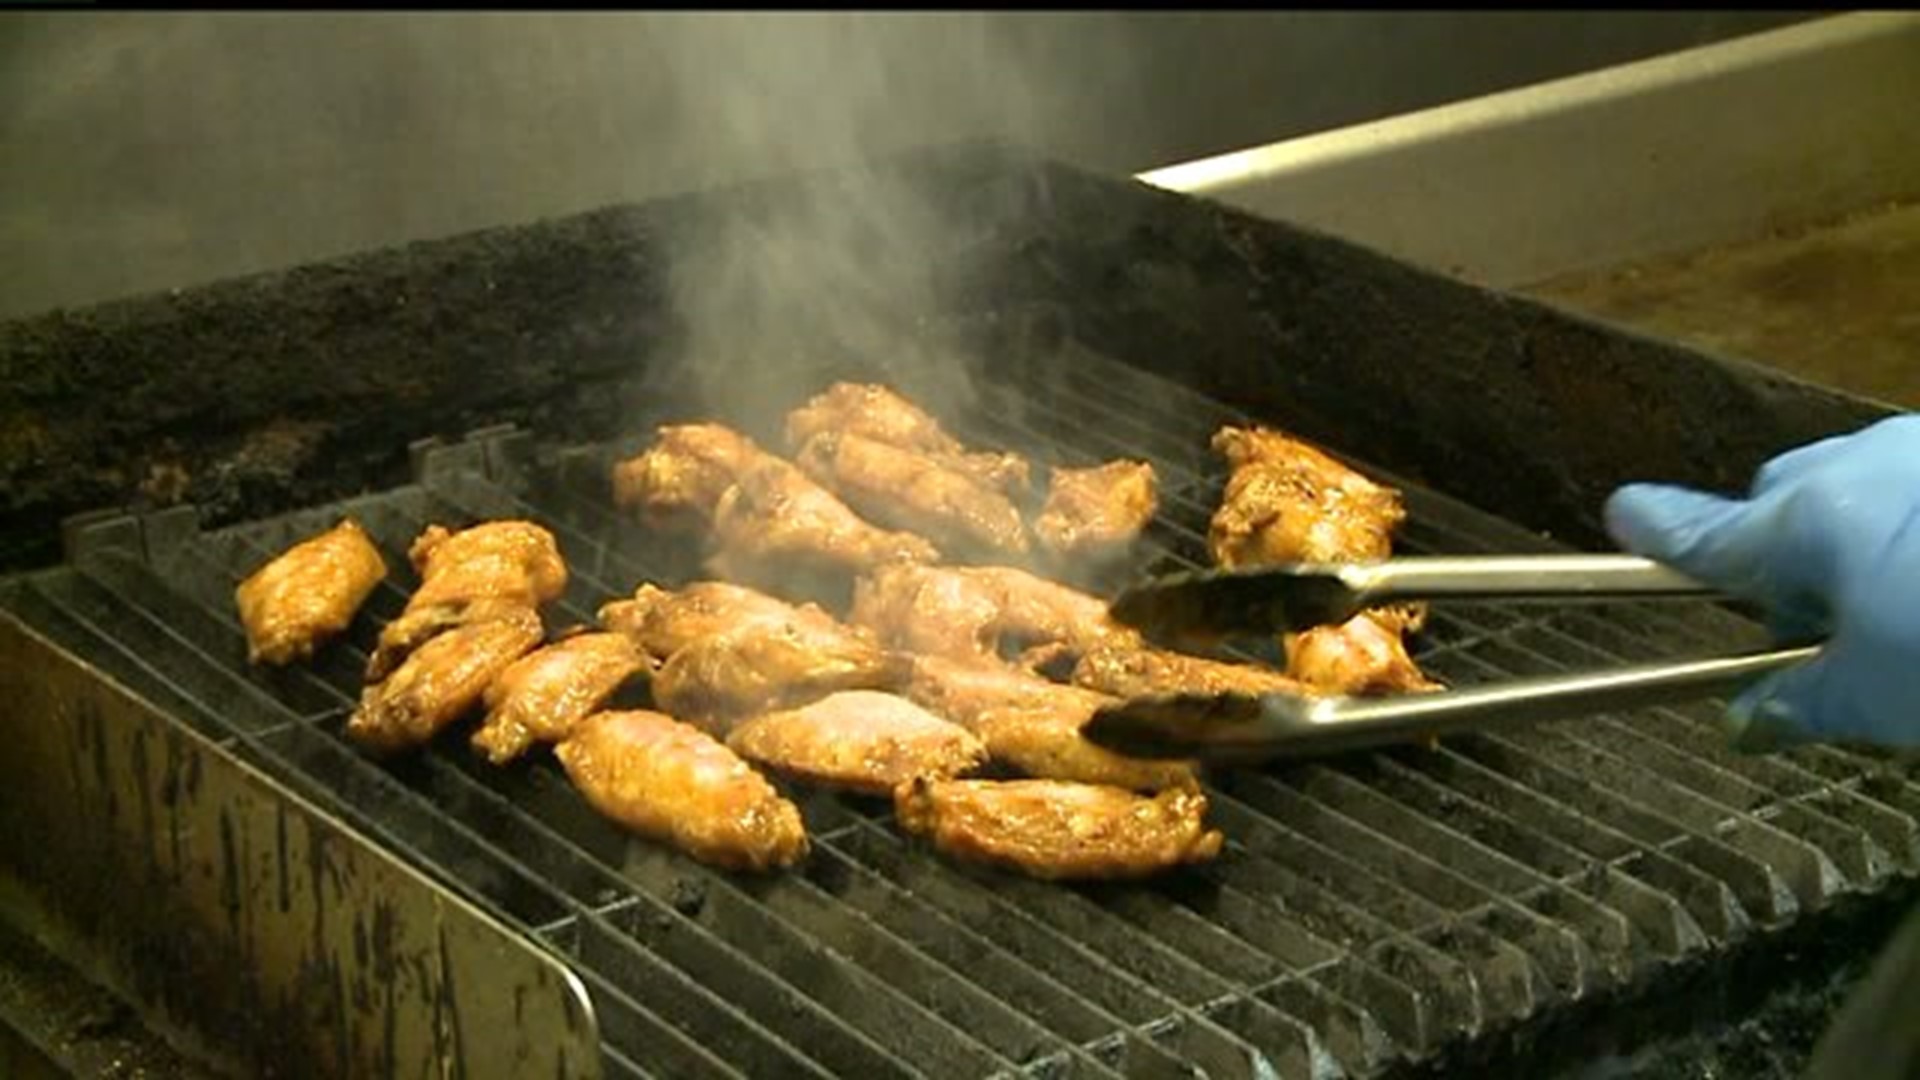 Wings in high demand at York County bar on Super Bowl Sunday